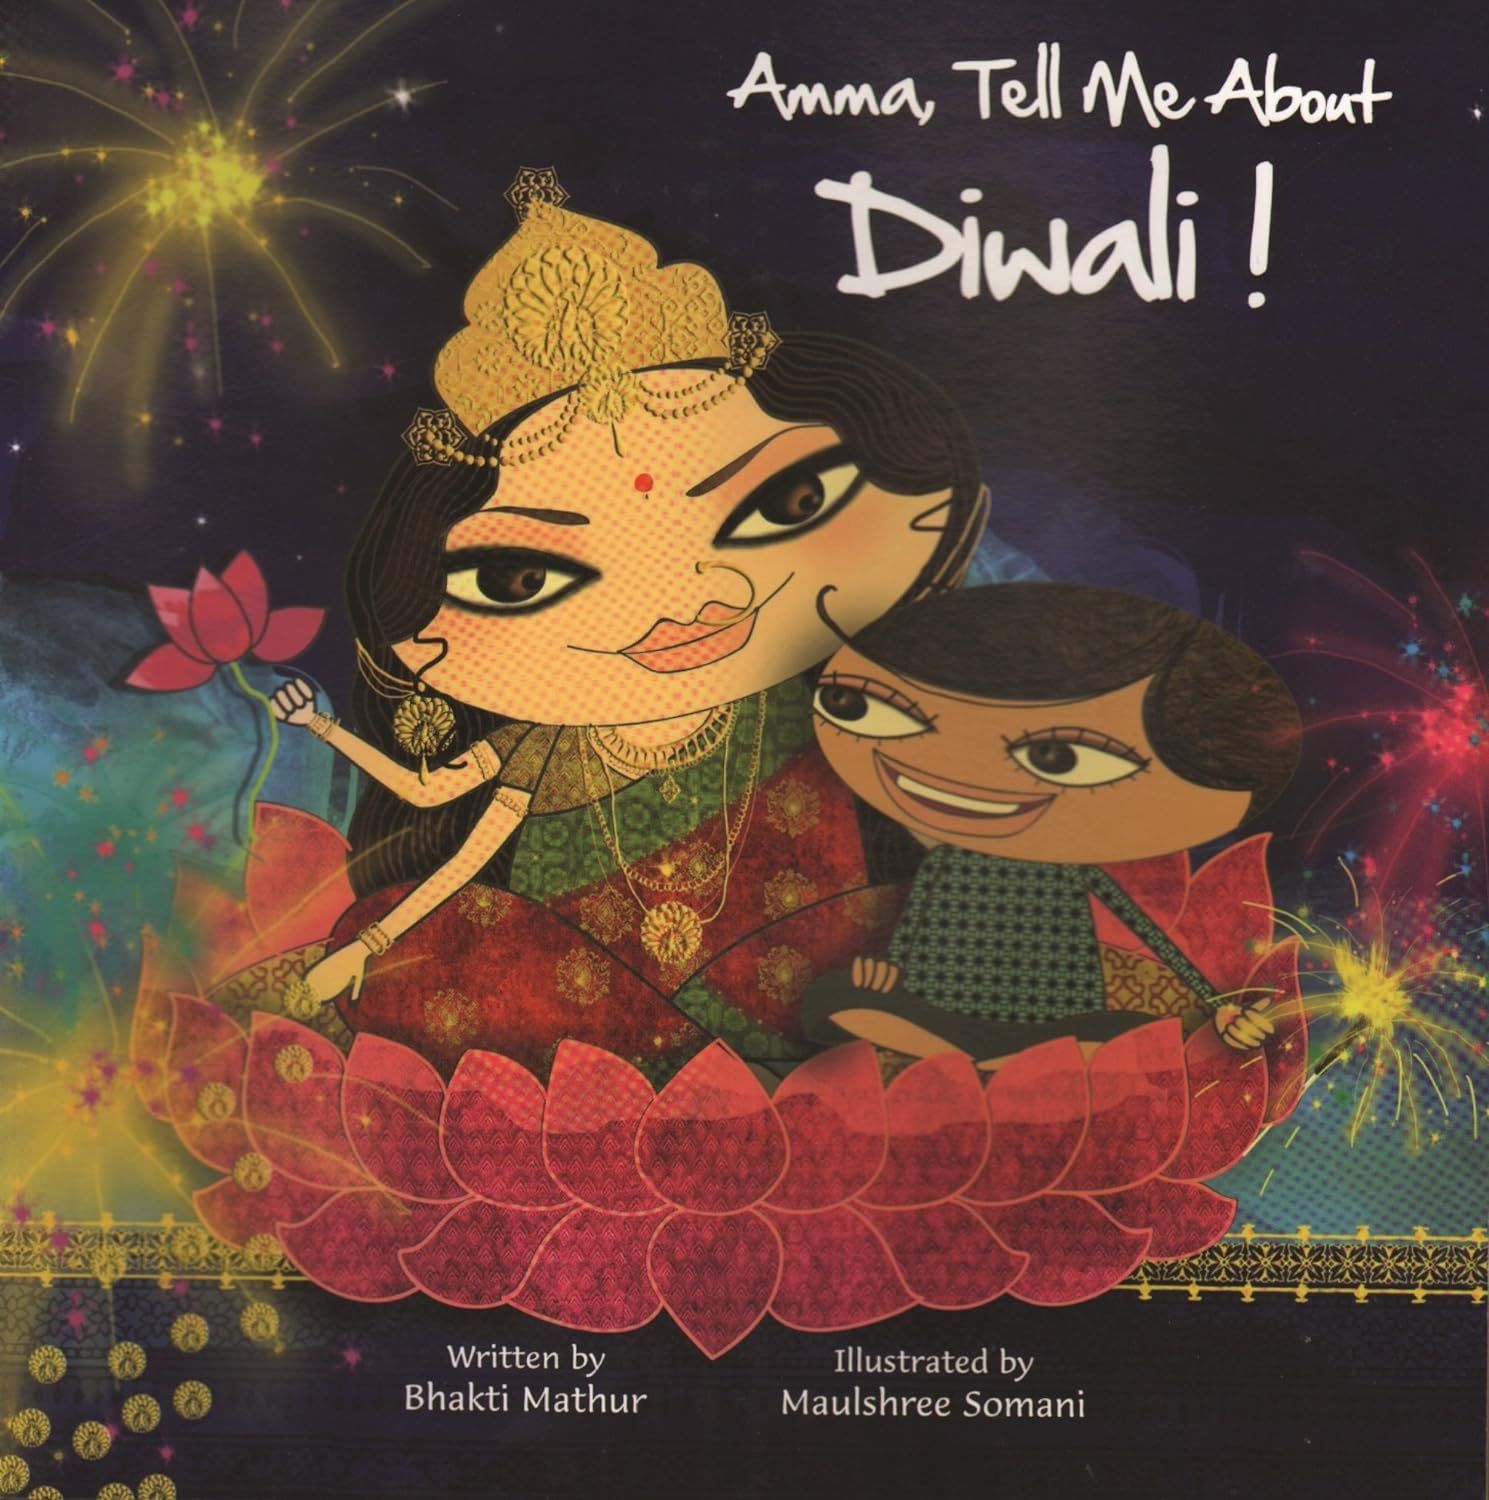 Amma, tell me about Diwali! book cover